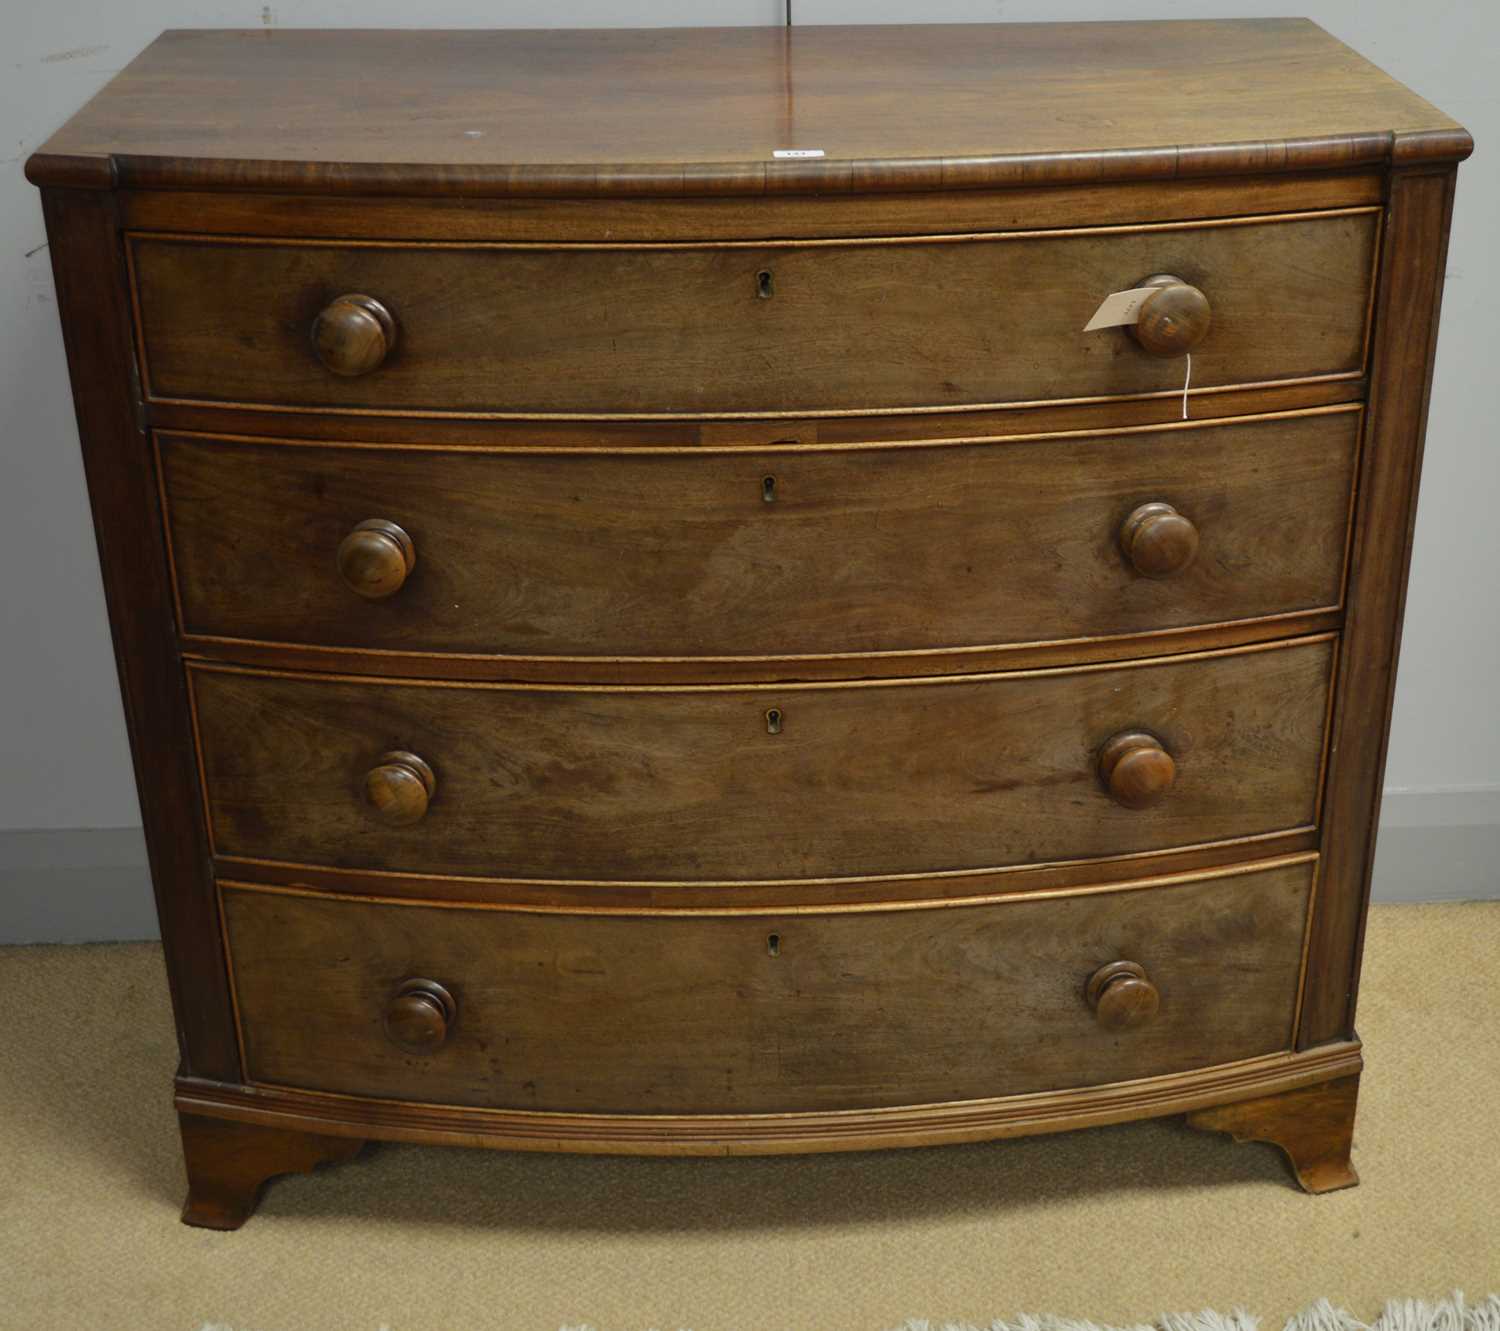 Lot 131 - Early 19th Century mahogany bowfront chest of drawers.